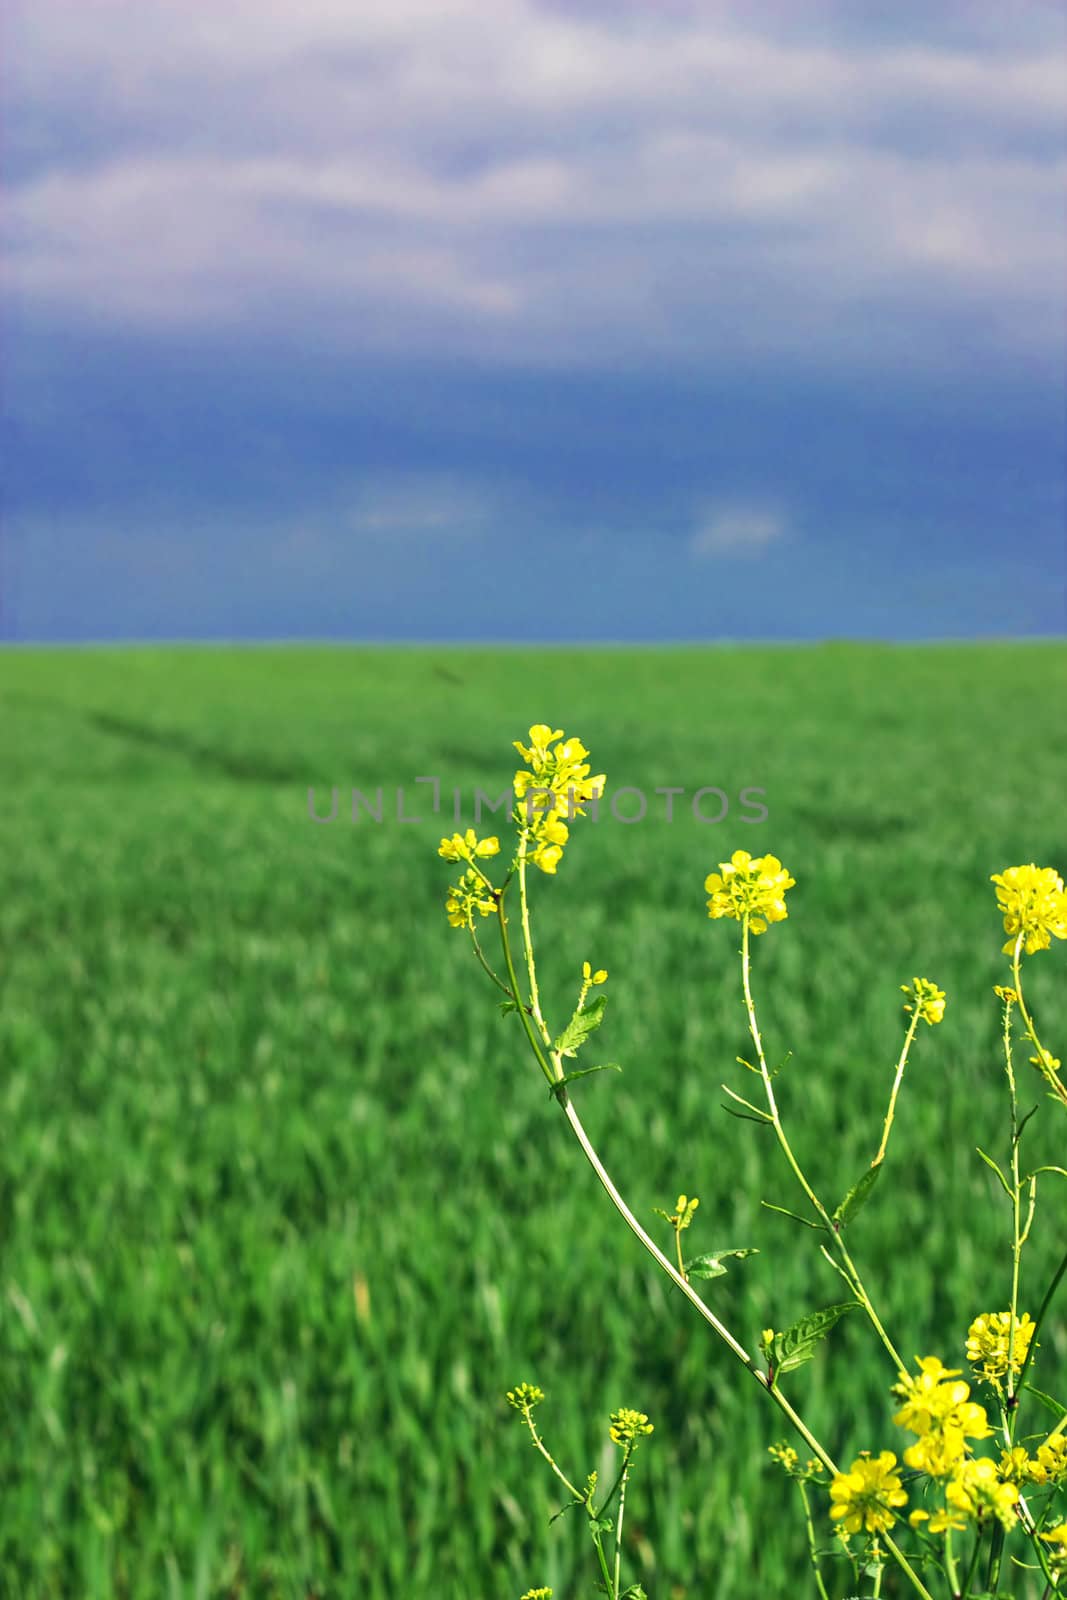 Rape seed flowers with wheat field and stormy sky in the background